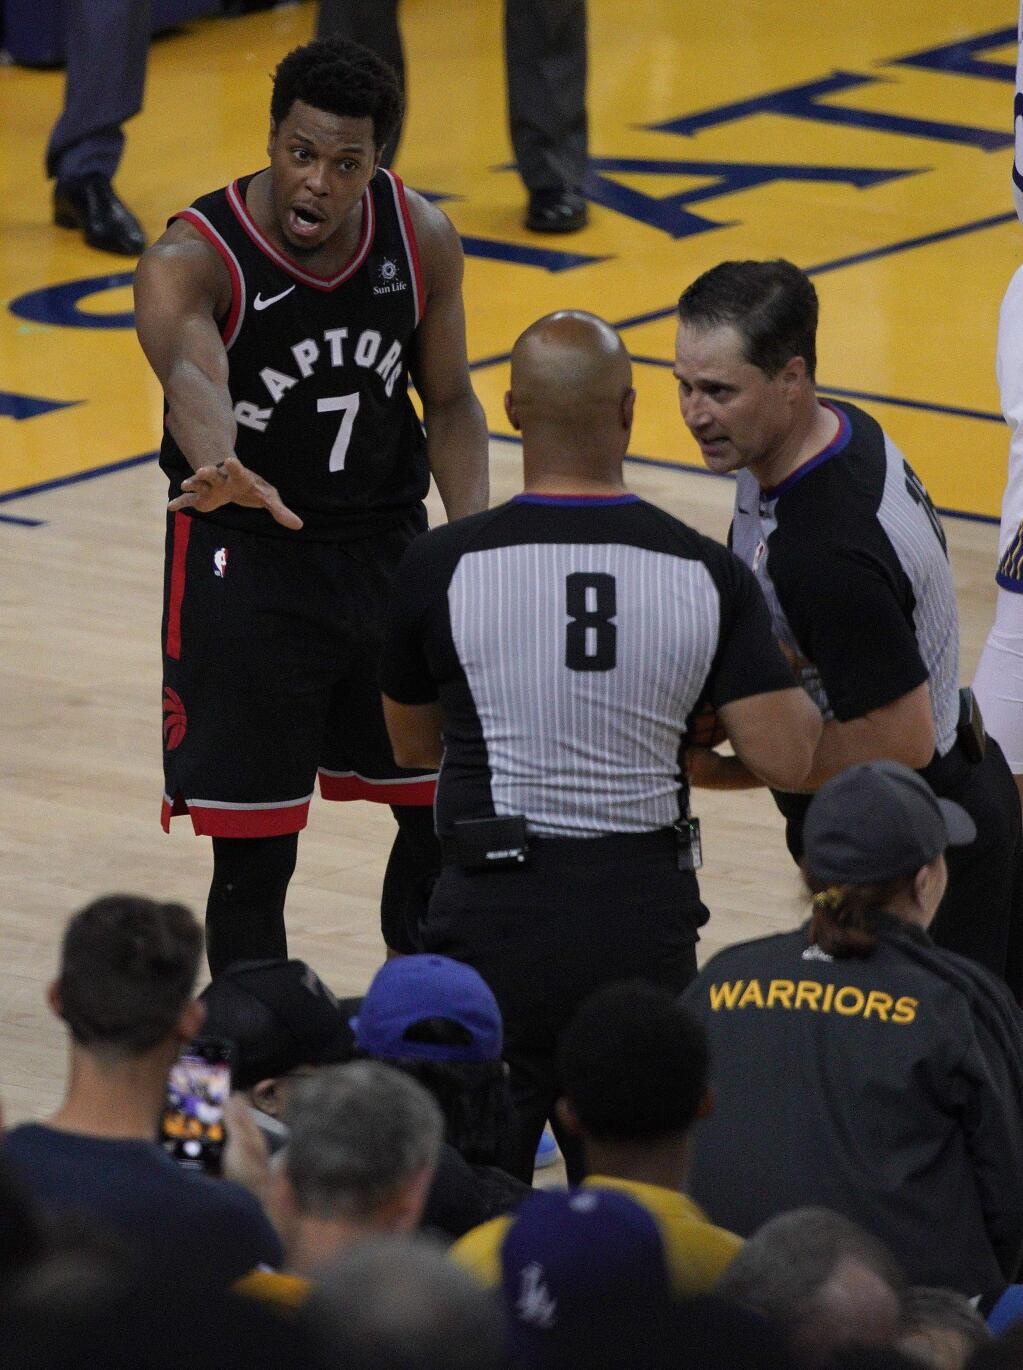 Toronto Raptors guard Kyle Lowry (7) gestures next to referees Marc Davis (8) and referee Kane Fitzgerald near the front row of fans during the second half of Game 3 of basketball's NBA Finals between the Golden State Warriors and the Raptors in Oakland, Calif., Wednesday, June 5, 2019. A fan seated courtside for Game 3 of the NBA Finals was ejected after shoving Lowry when the Raptors star crashed into a row of seats while trying to save a ball from going out of bounds on Wednesday night. (AP Photo/Tony Avelar)